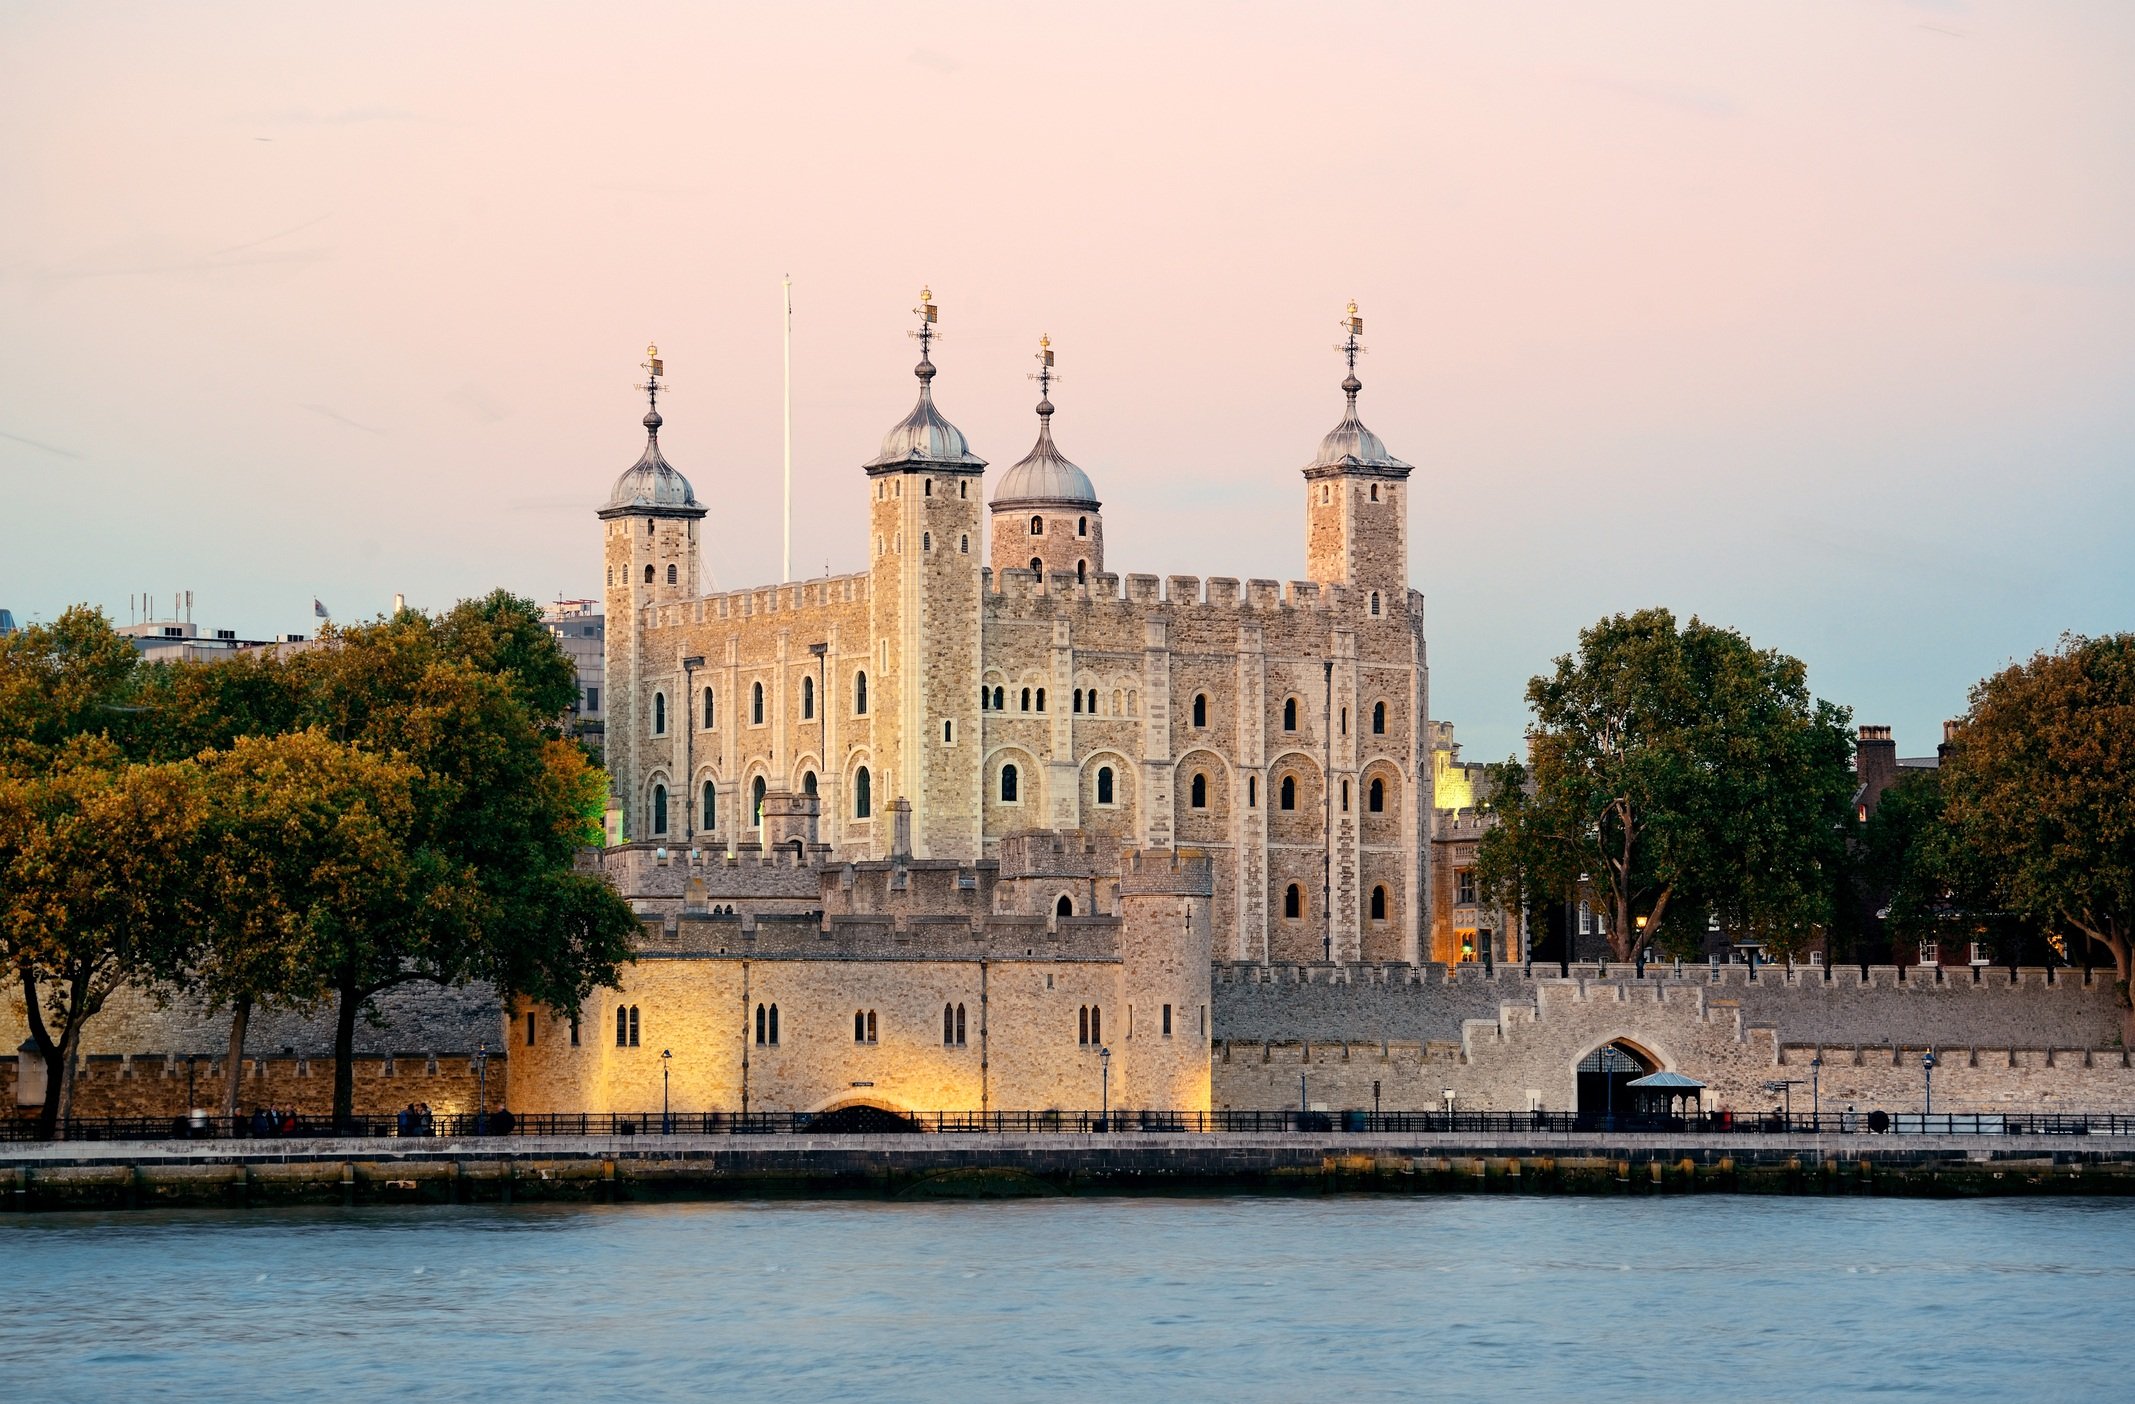 Tower of London during sunset